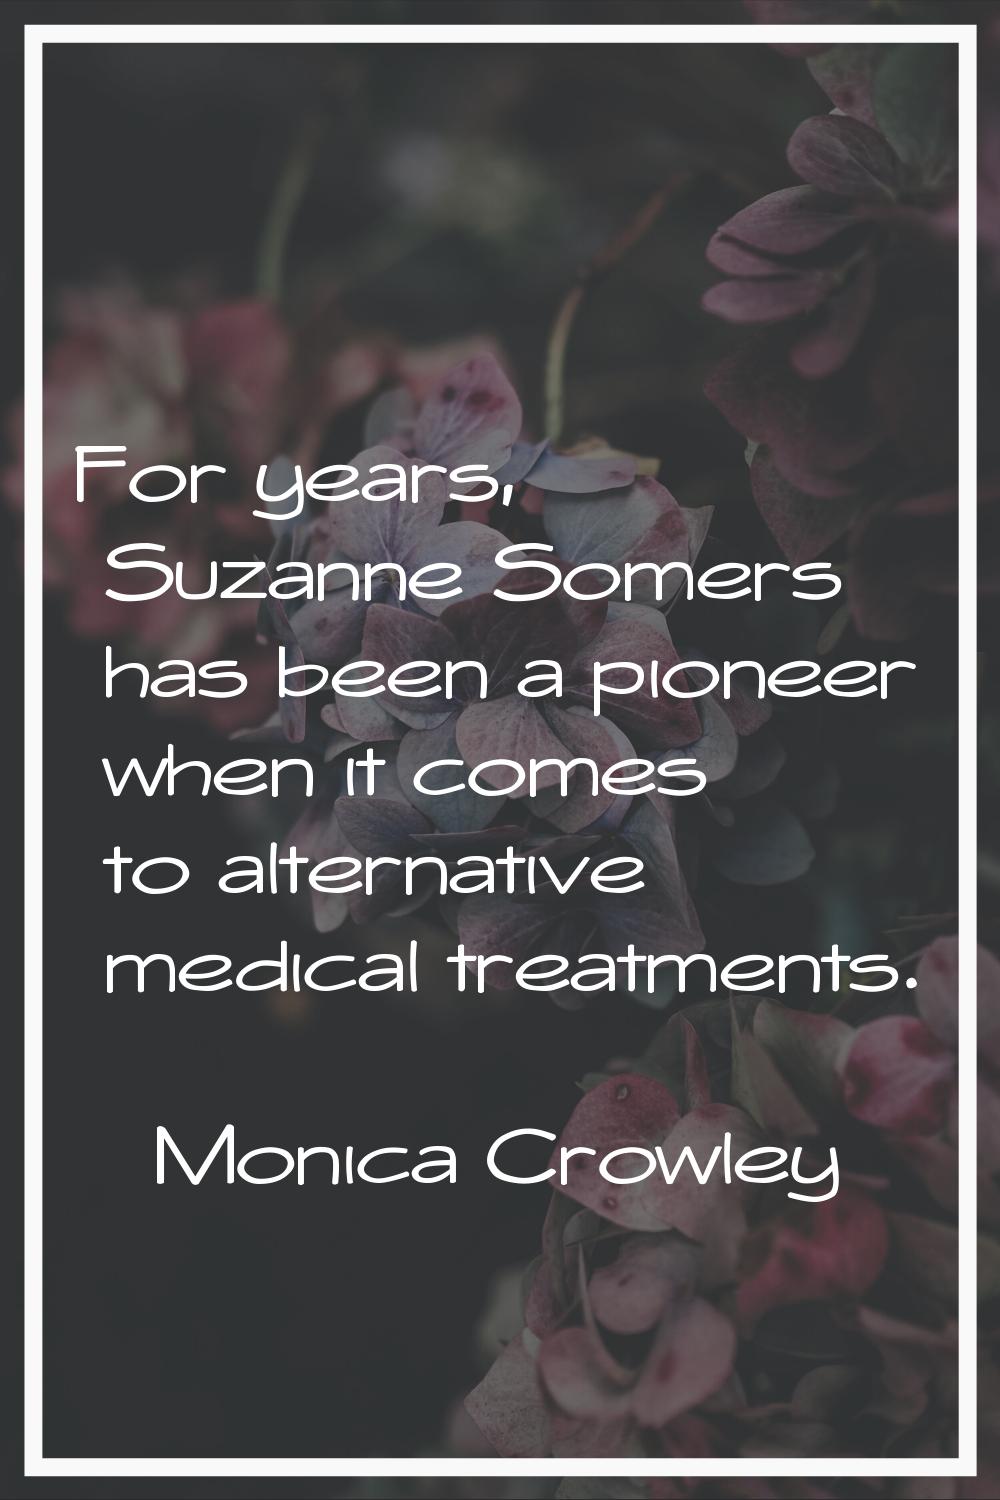 For years, Suzanne Somers has been a pioneer when it comes to alternative medical treatments.